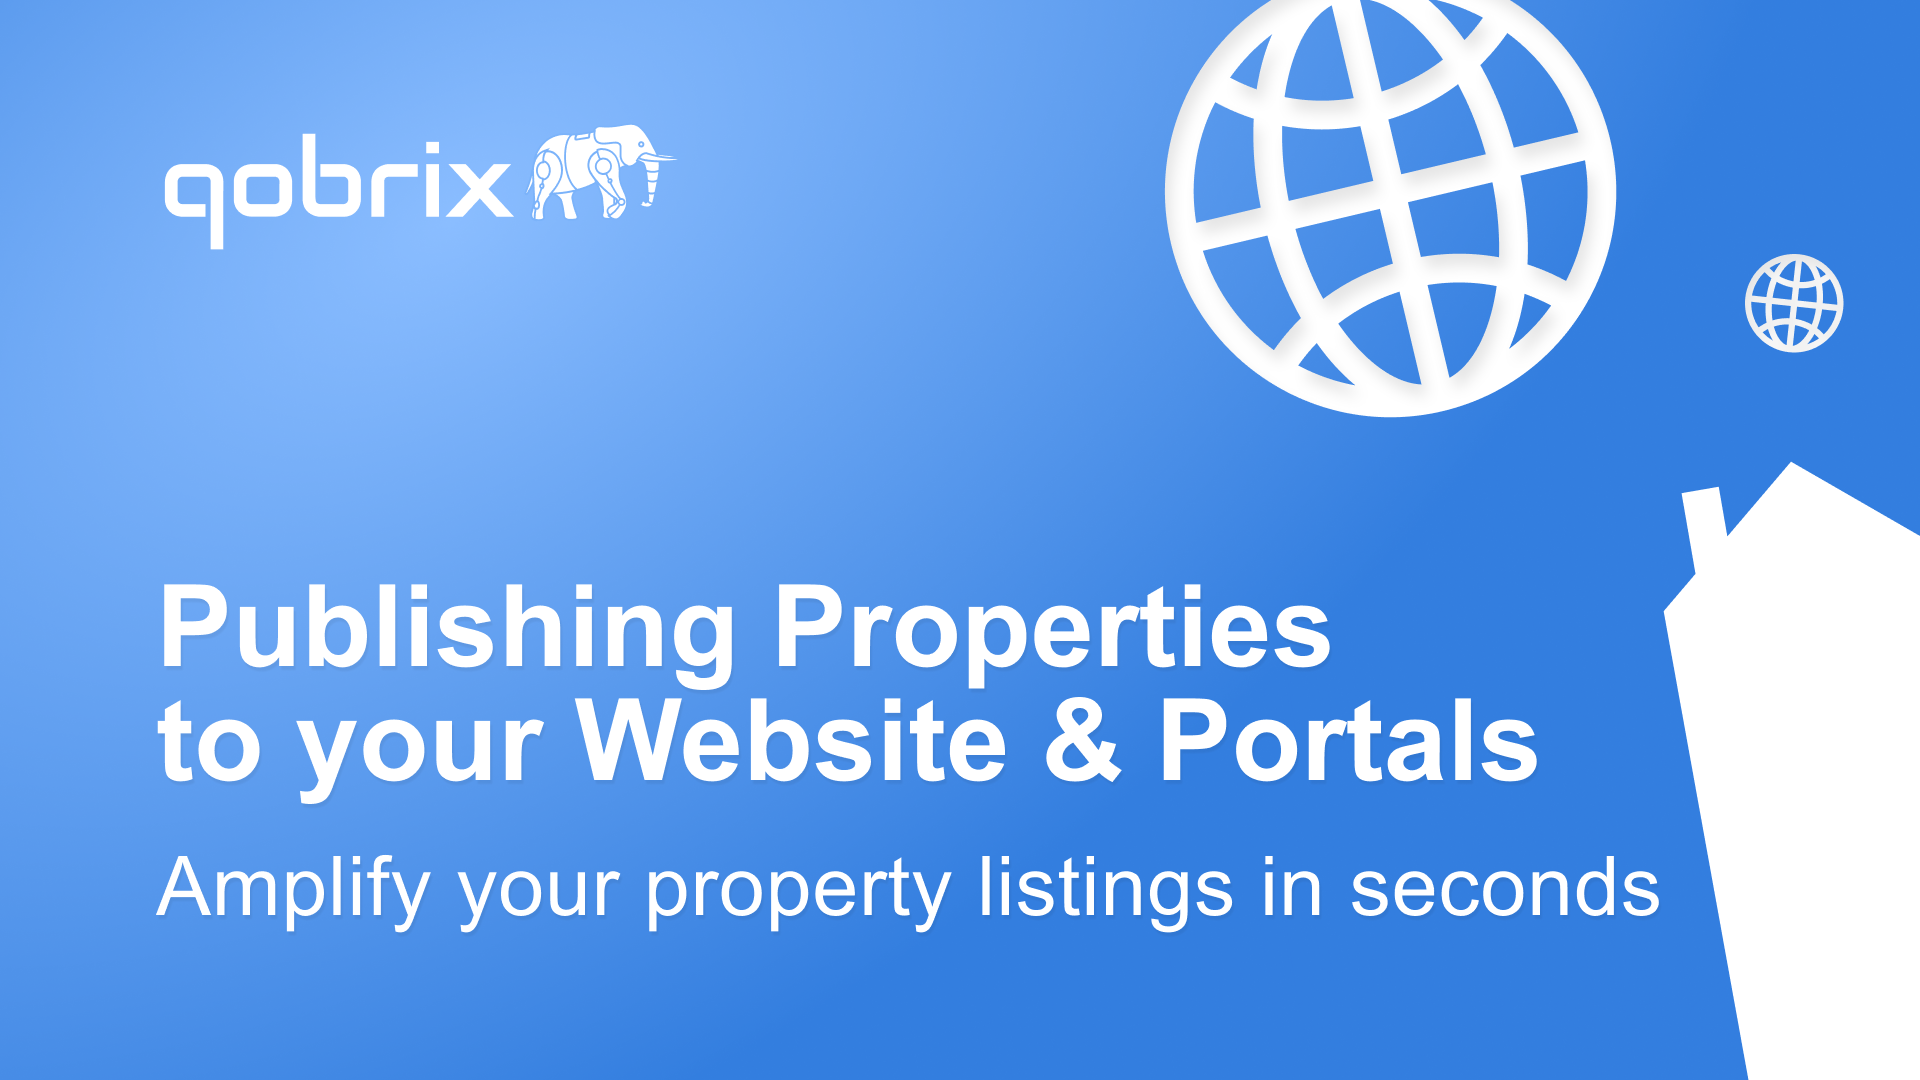 Publishing properties to your website and real estate portals through Qobrix